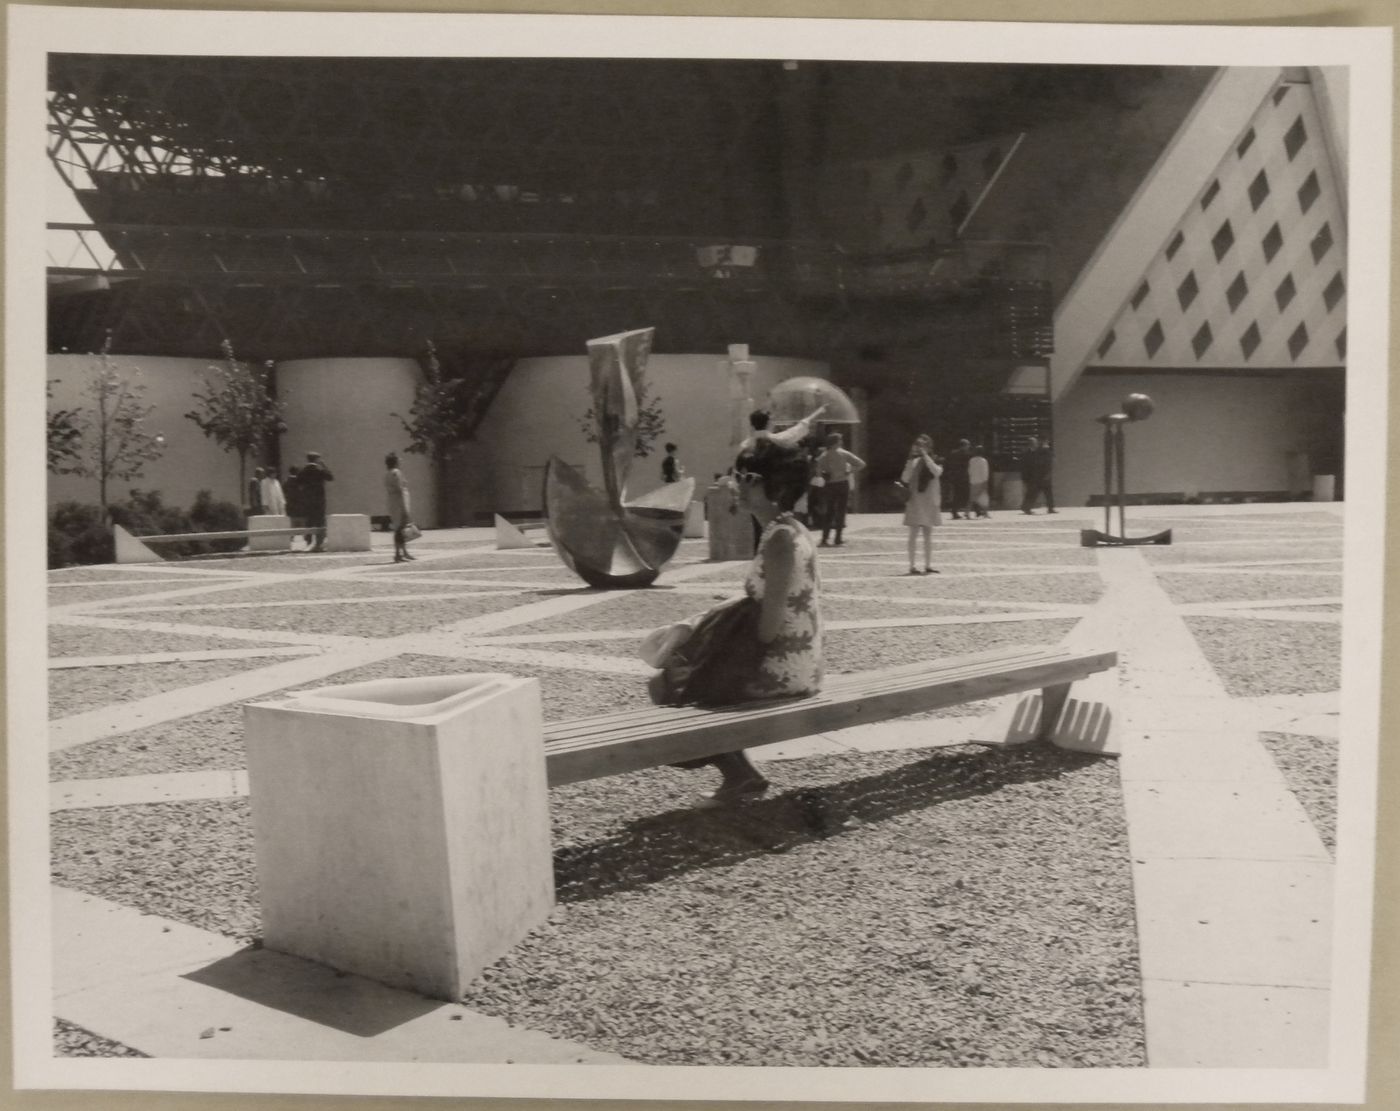 View of a visitor sitting on a bench with sculptures in background, Expo 67, Montréal, Québec